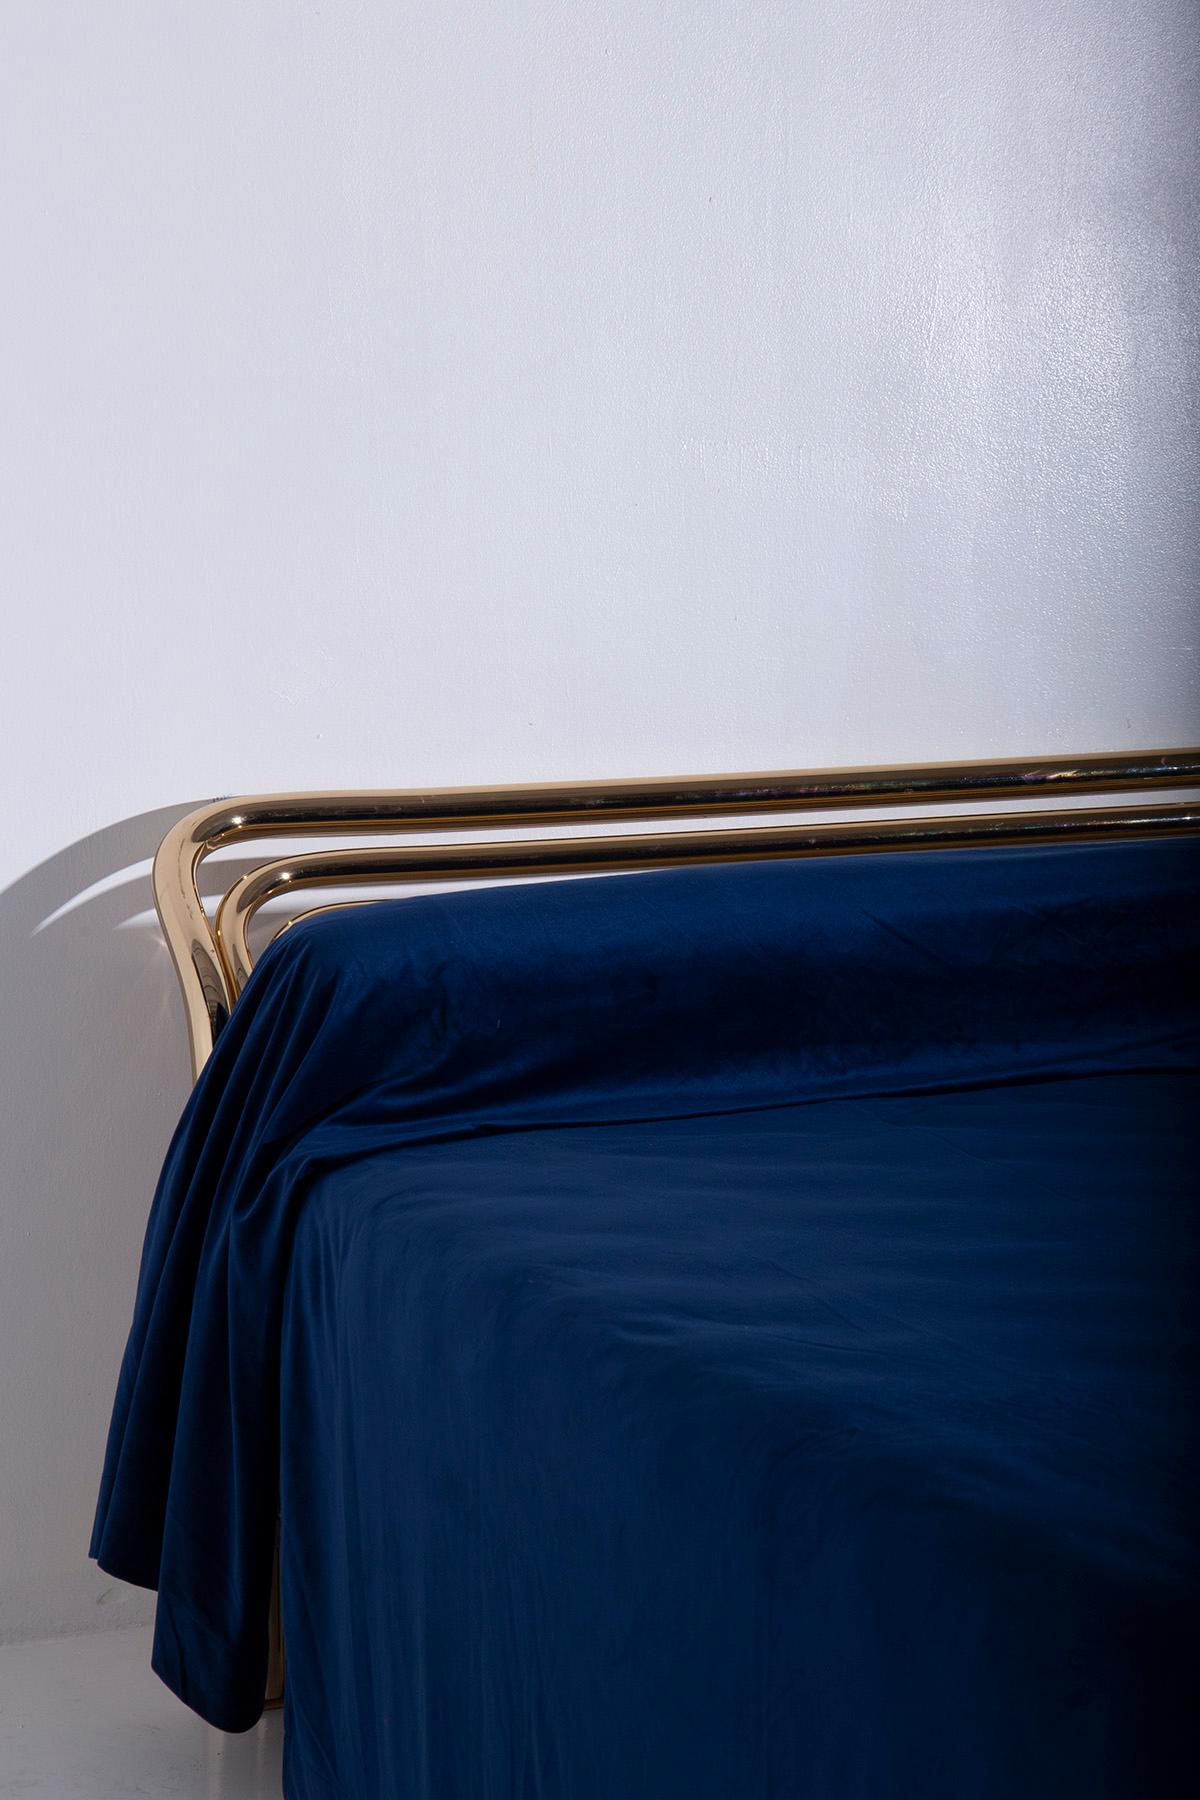 Step back in time to the glamorous 1970s with this exquisite Italian double bed designed by the talented Lucino Frigerio and proudly marked by the same illustrious manufacturer. Its very essence is crafted from lustrous brass tubing, a material